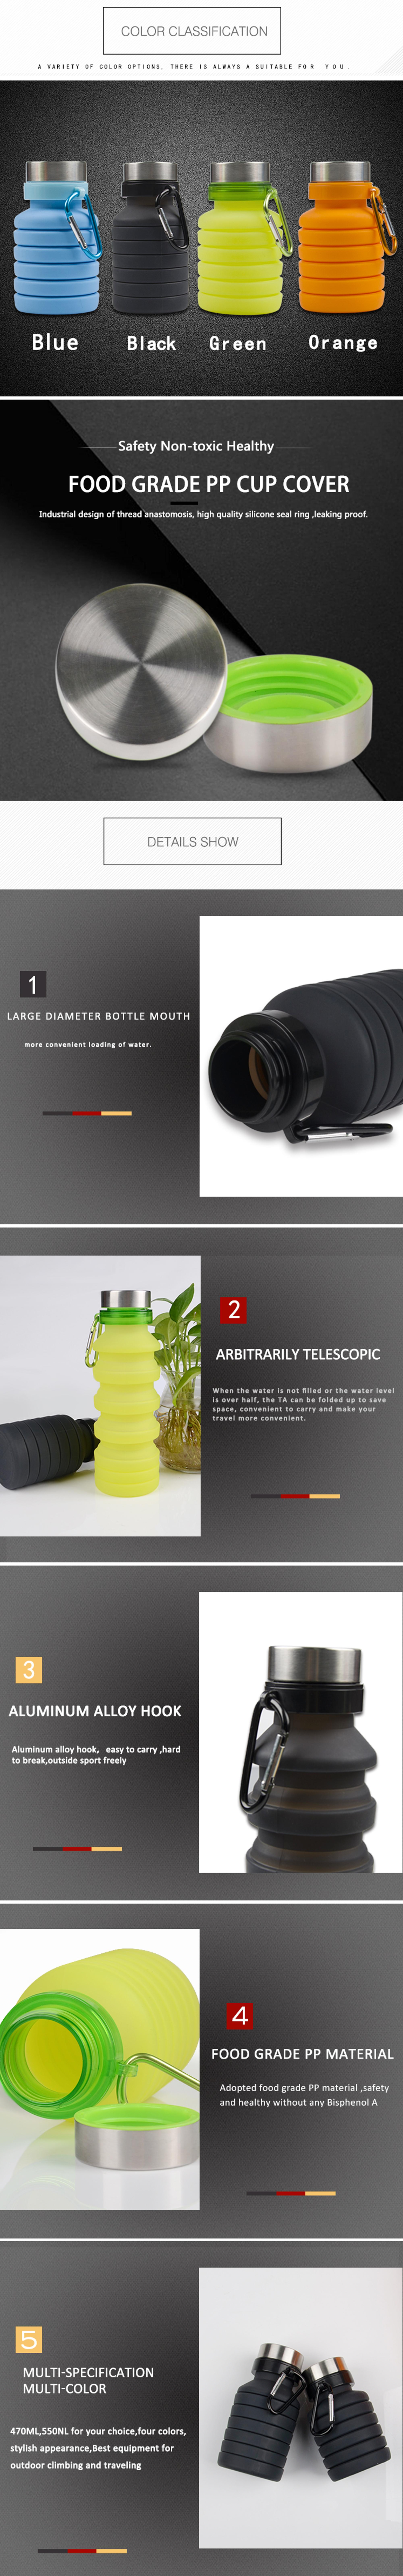  High Quality outdoor water bottle 5